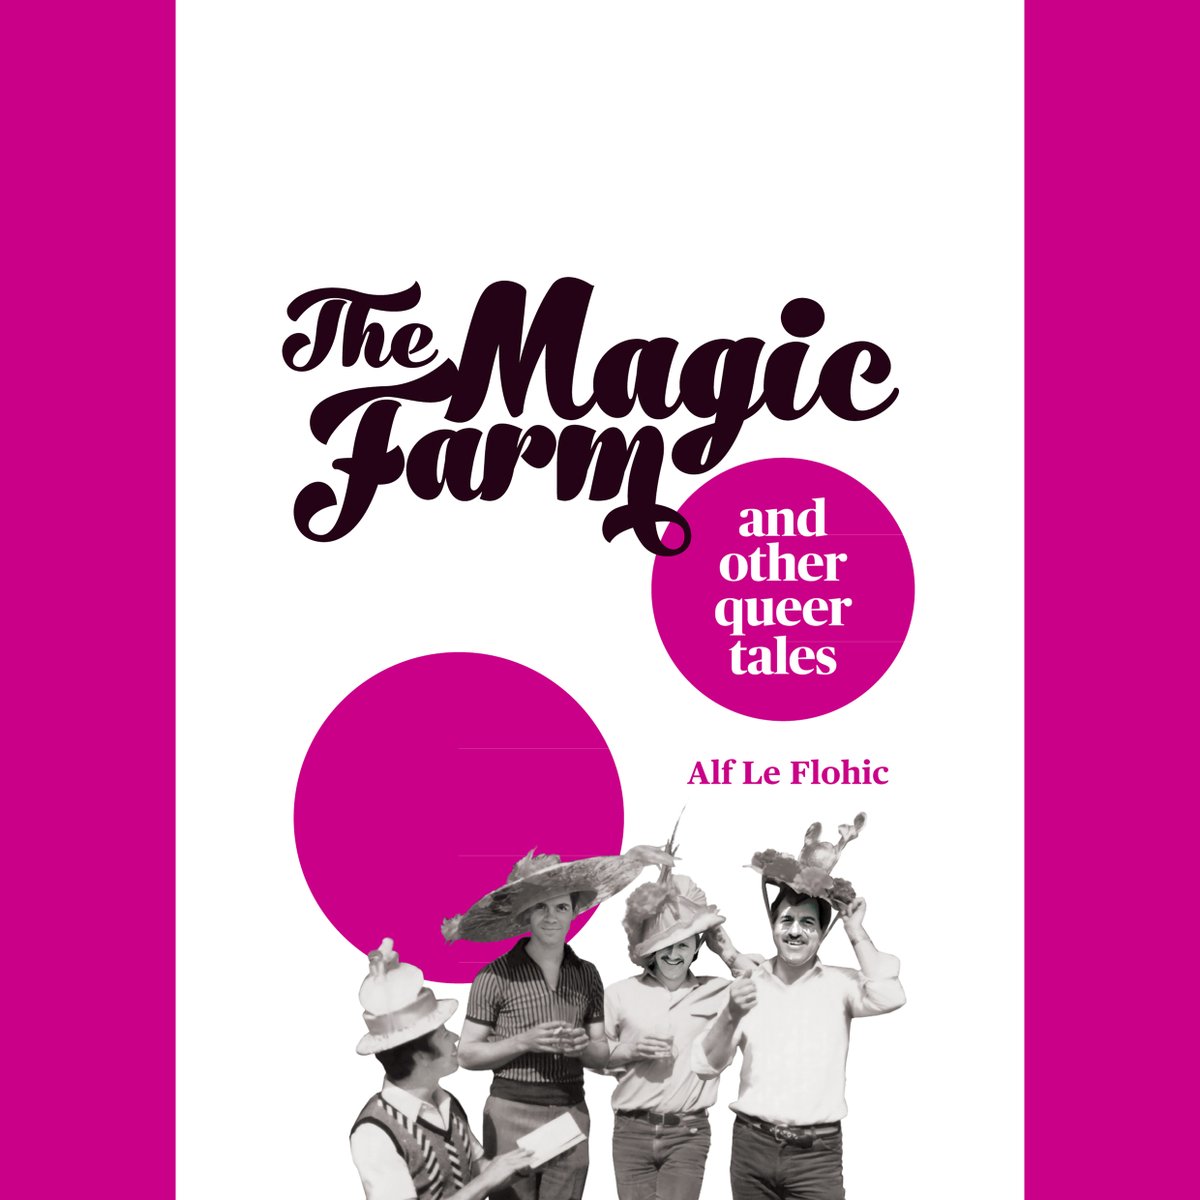 Hold on to your hats, folks! To round off #lgbtplusHM, here's the GRAND COVER REVEAL of The Magic Farm and Other Queer Tales by @alfinbrighton - queer oral histories from the 1970s and 1980s, coming very soon from us and Homo Made Books. Watch this space: bit.ly/magicfarmbook